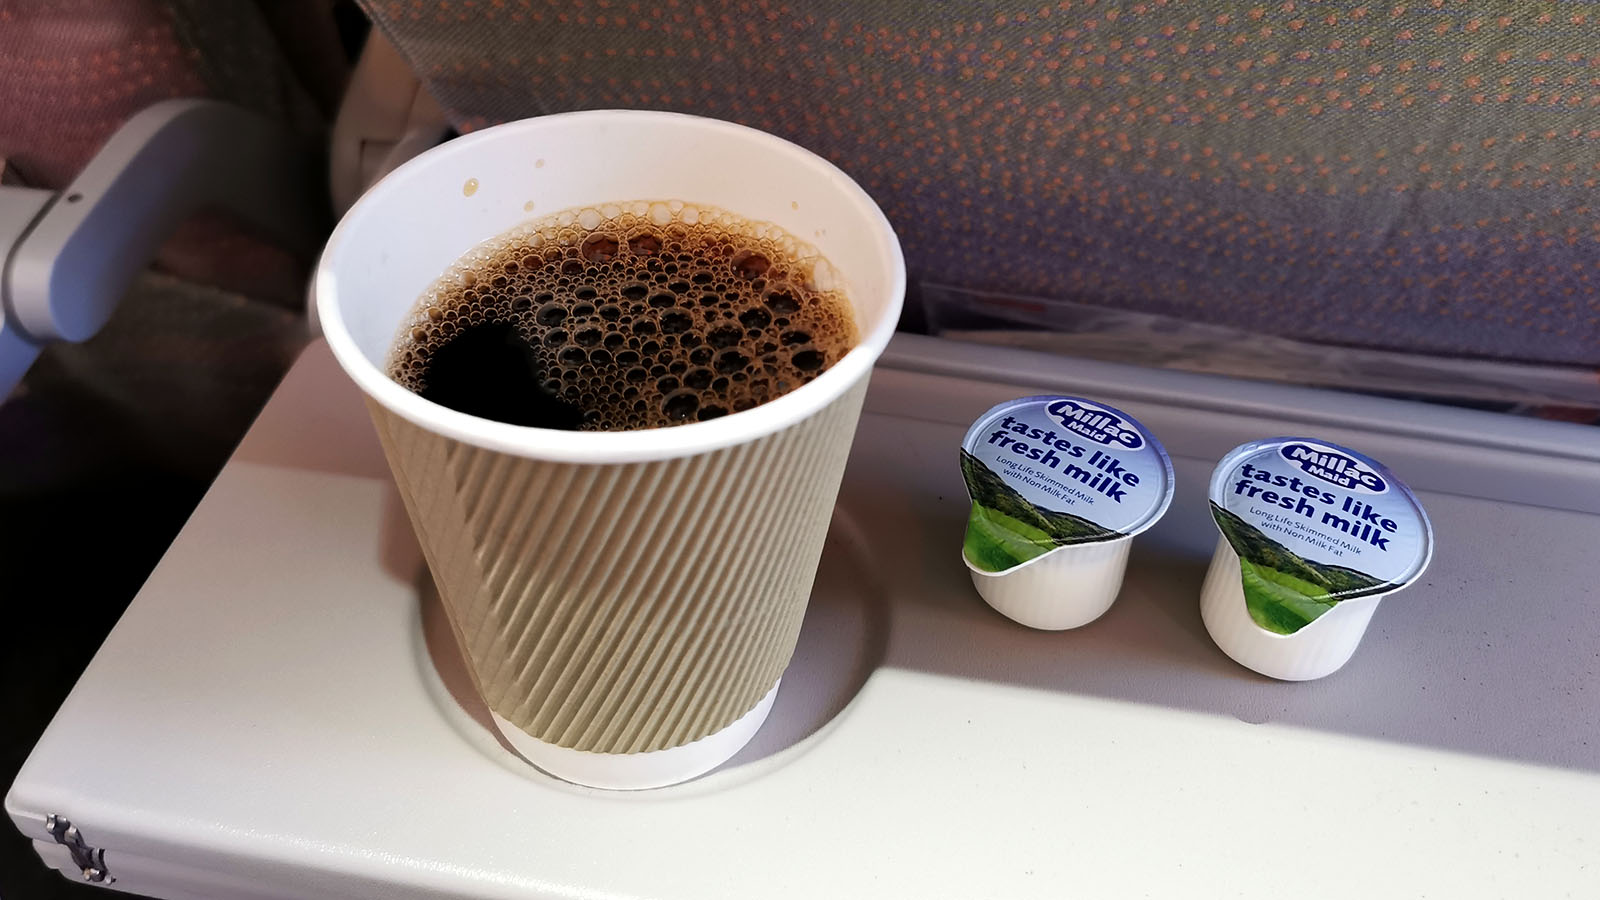 Hot drink in Emirates Airbus A380 Economy